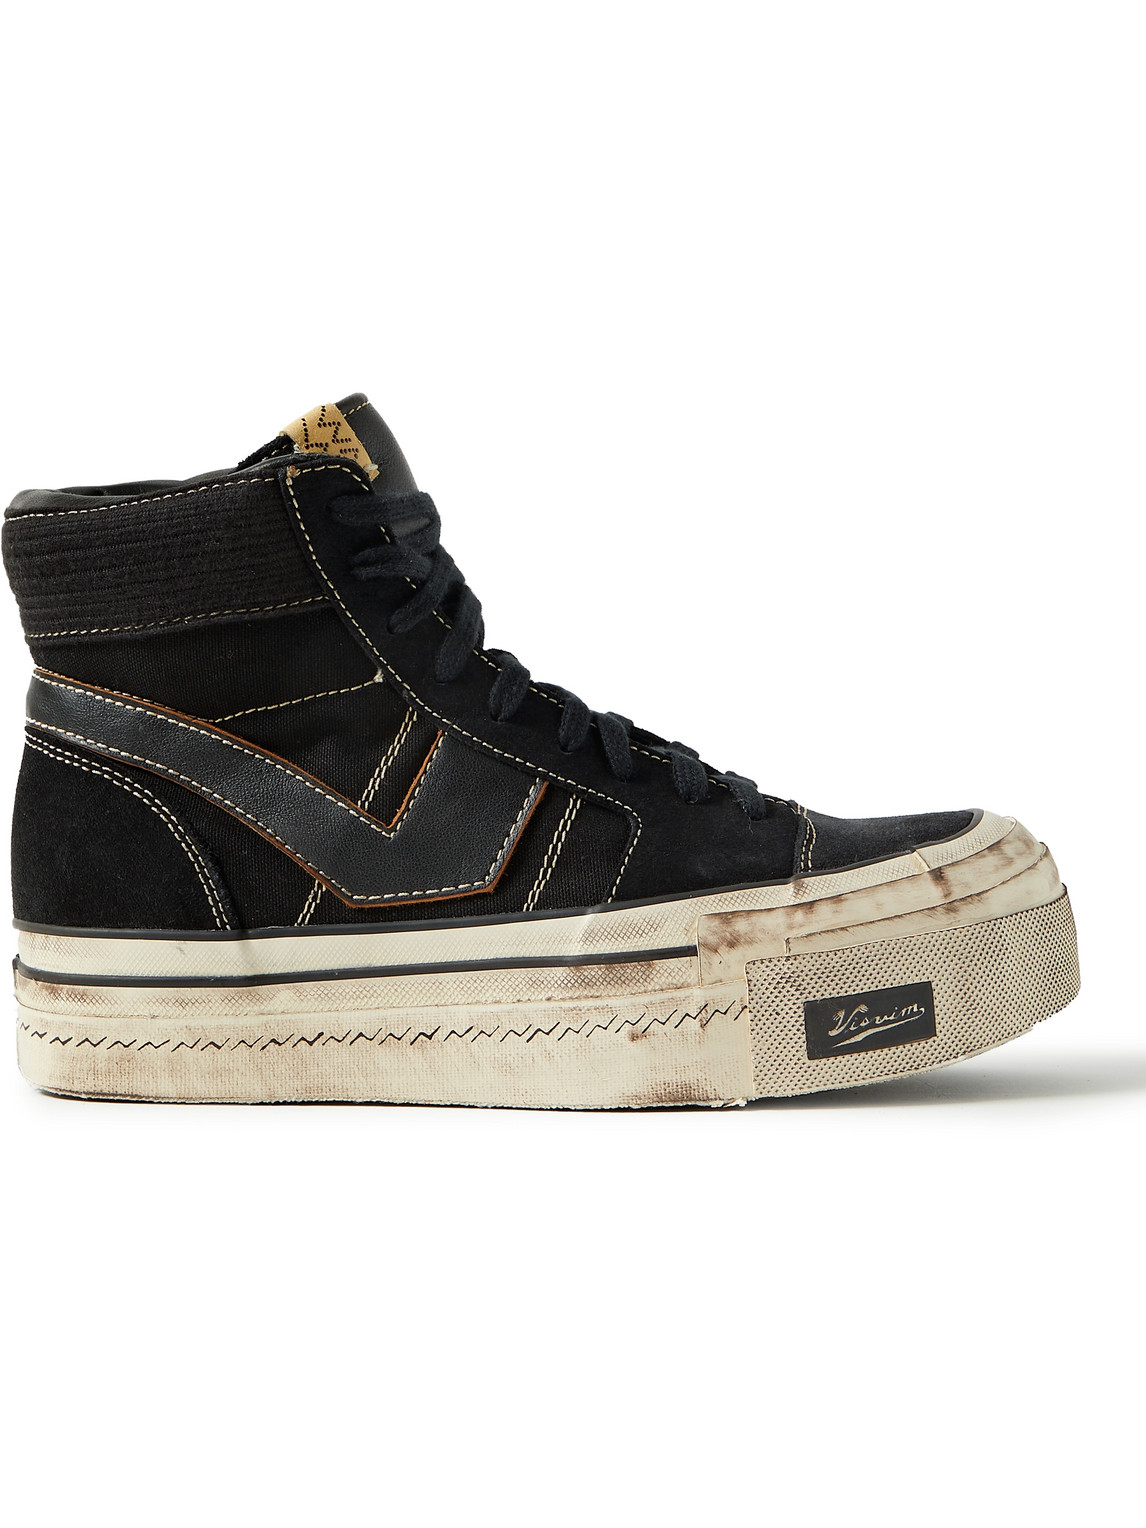 VISVIM ZEPHYR HI DISTRESSED LEATHER-TRIMMED COTTON-CANVAS HIGH-TOP SNEAKERS